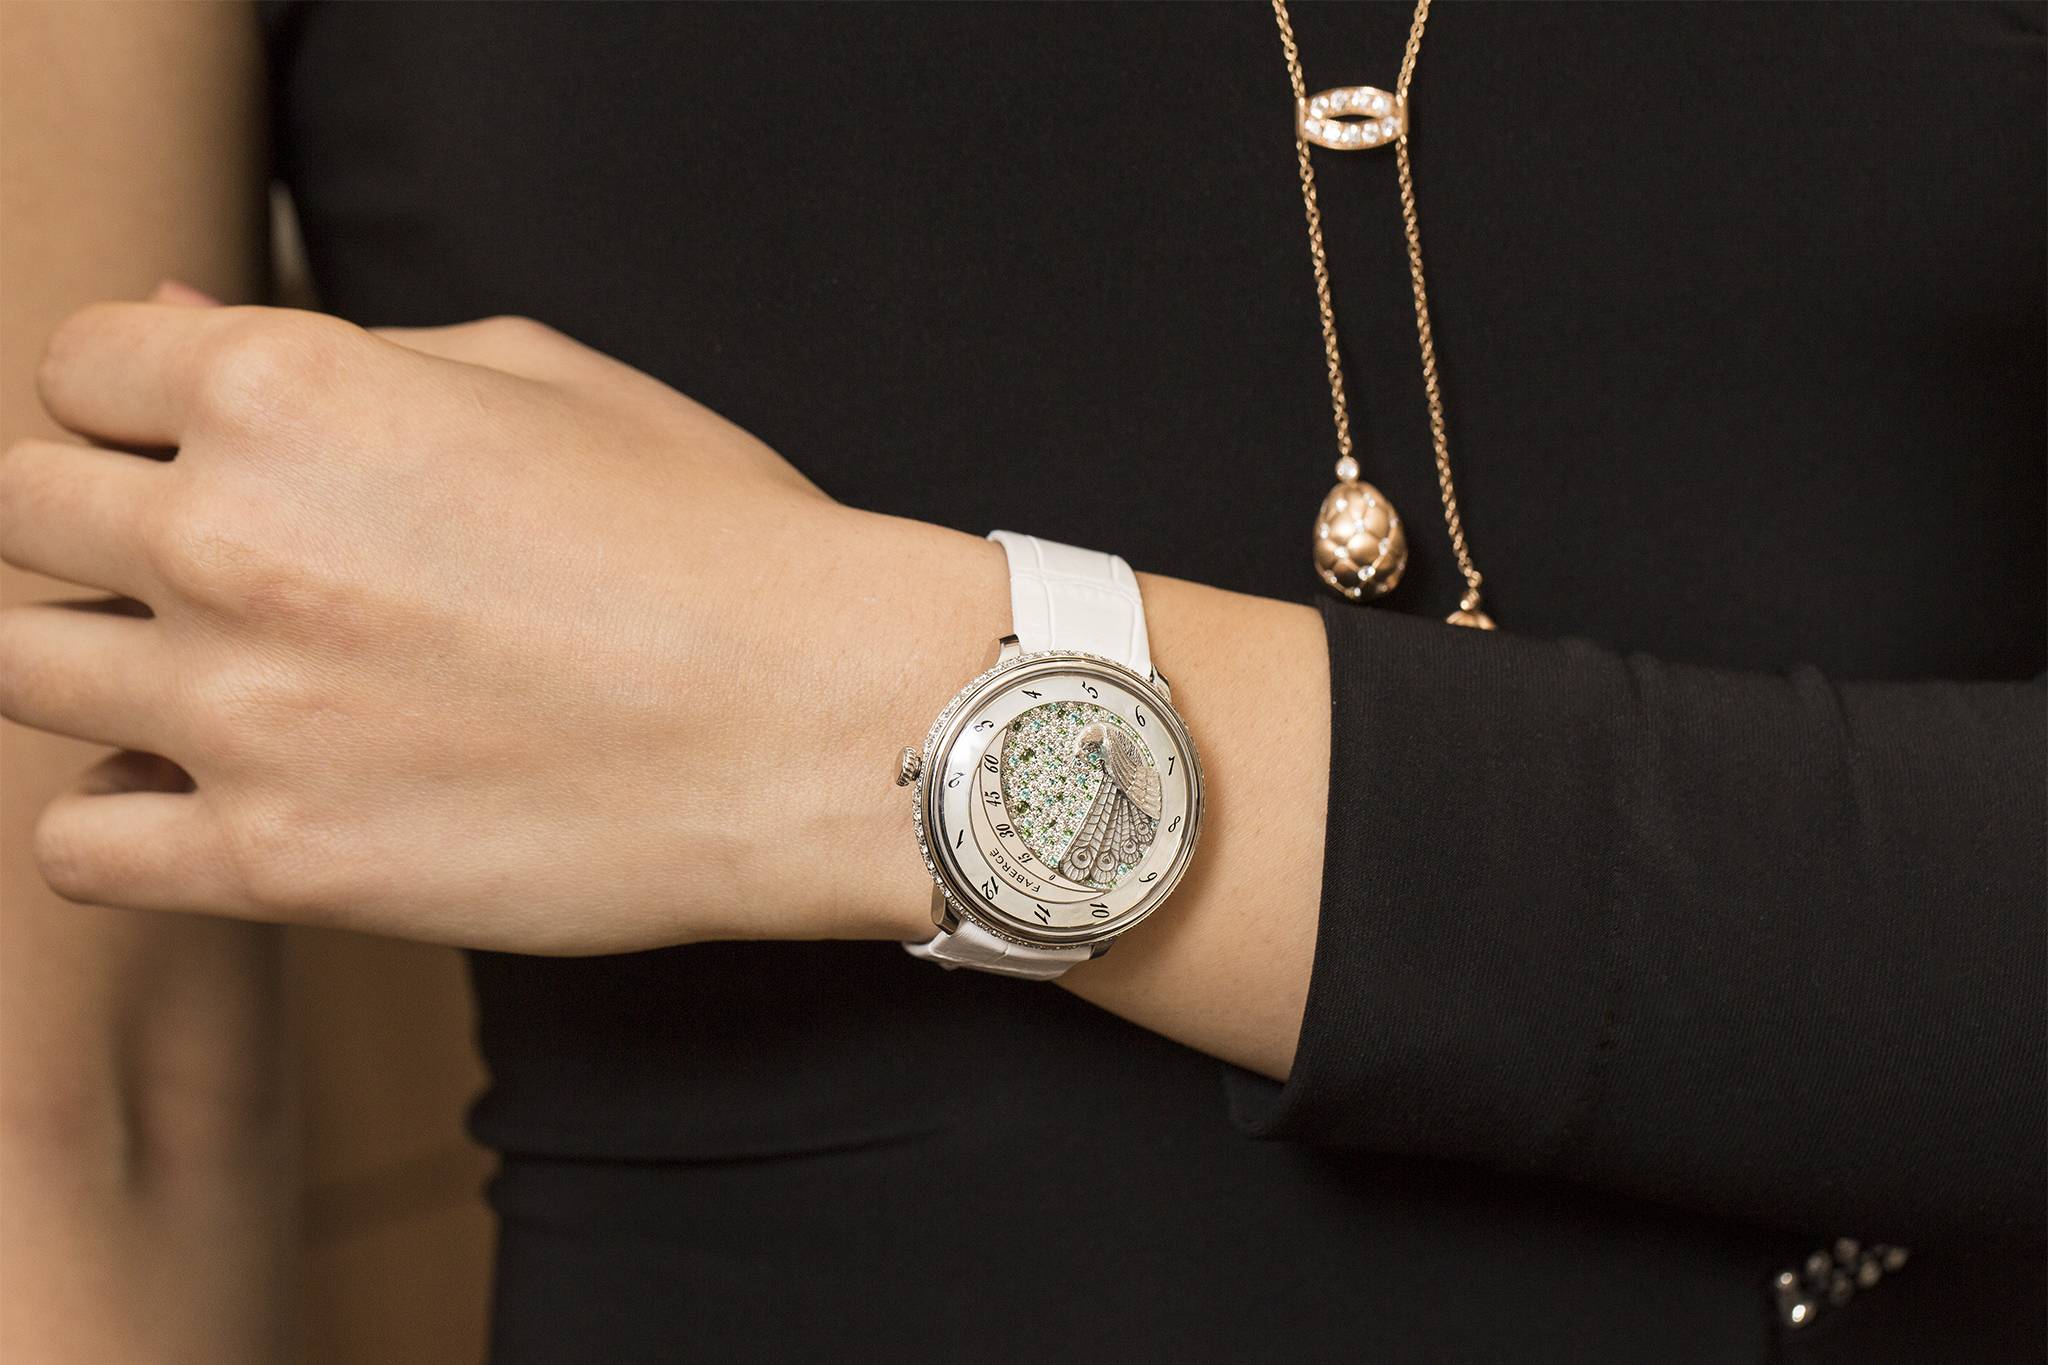 Hands On With The Fabergé Lady Compliquée Peacock Watch